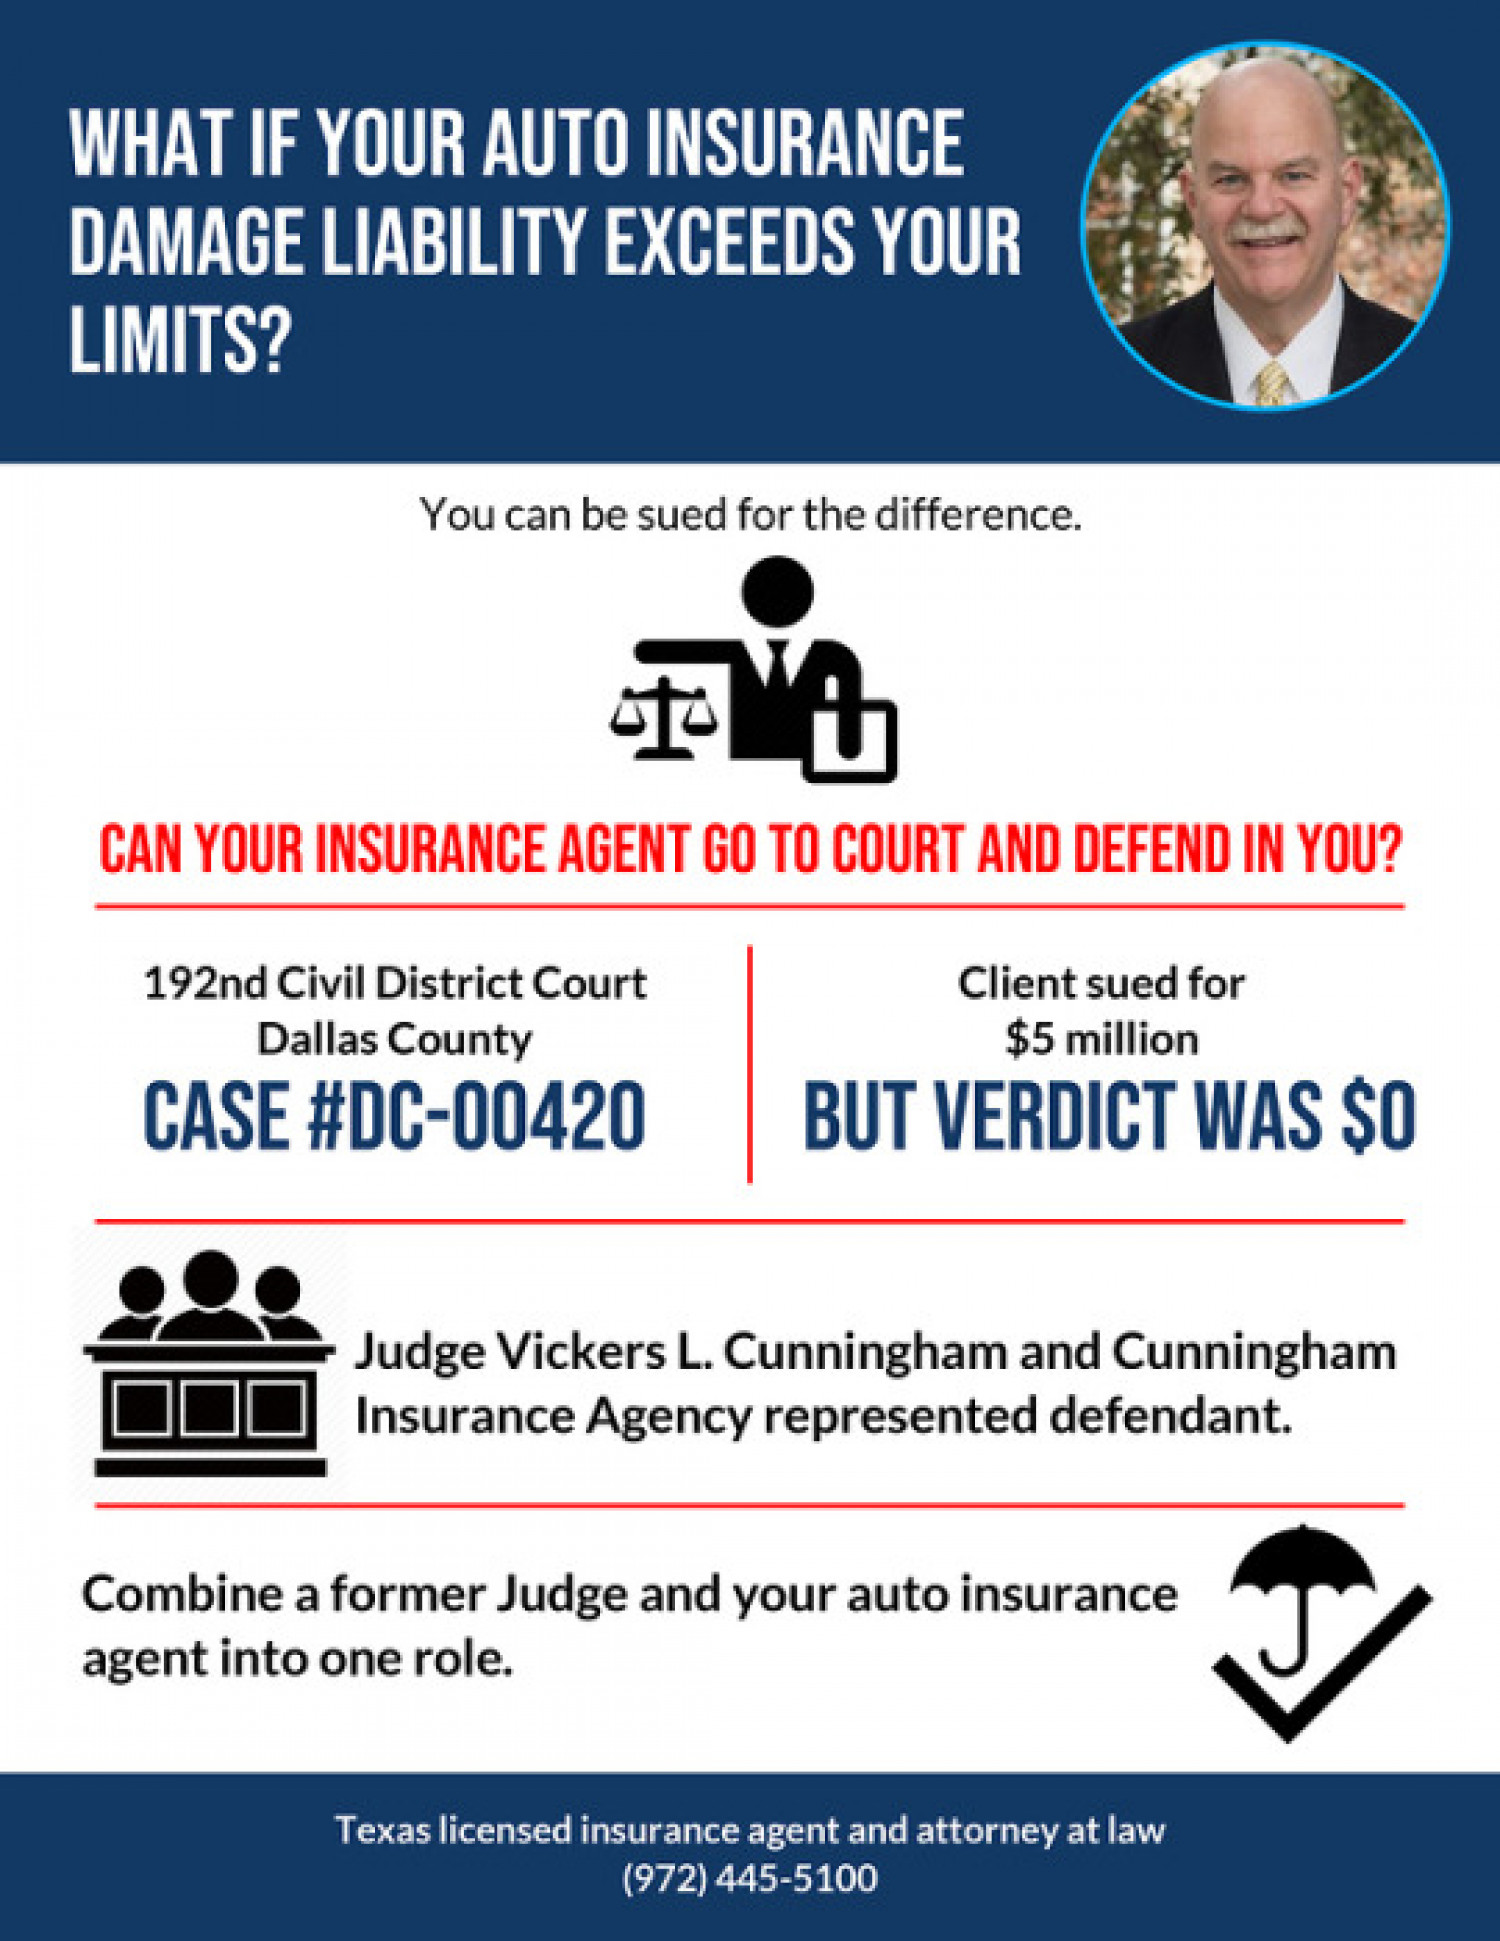 Judge Vickers Lee Cunningham - Insurance Agent Dallas Infographic